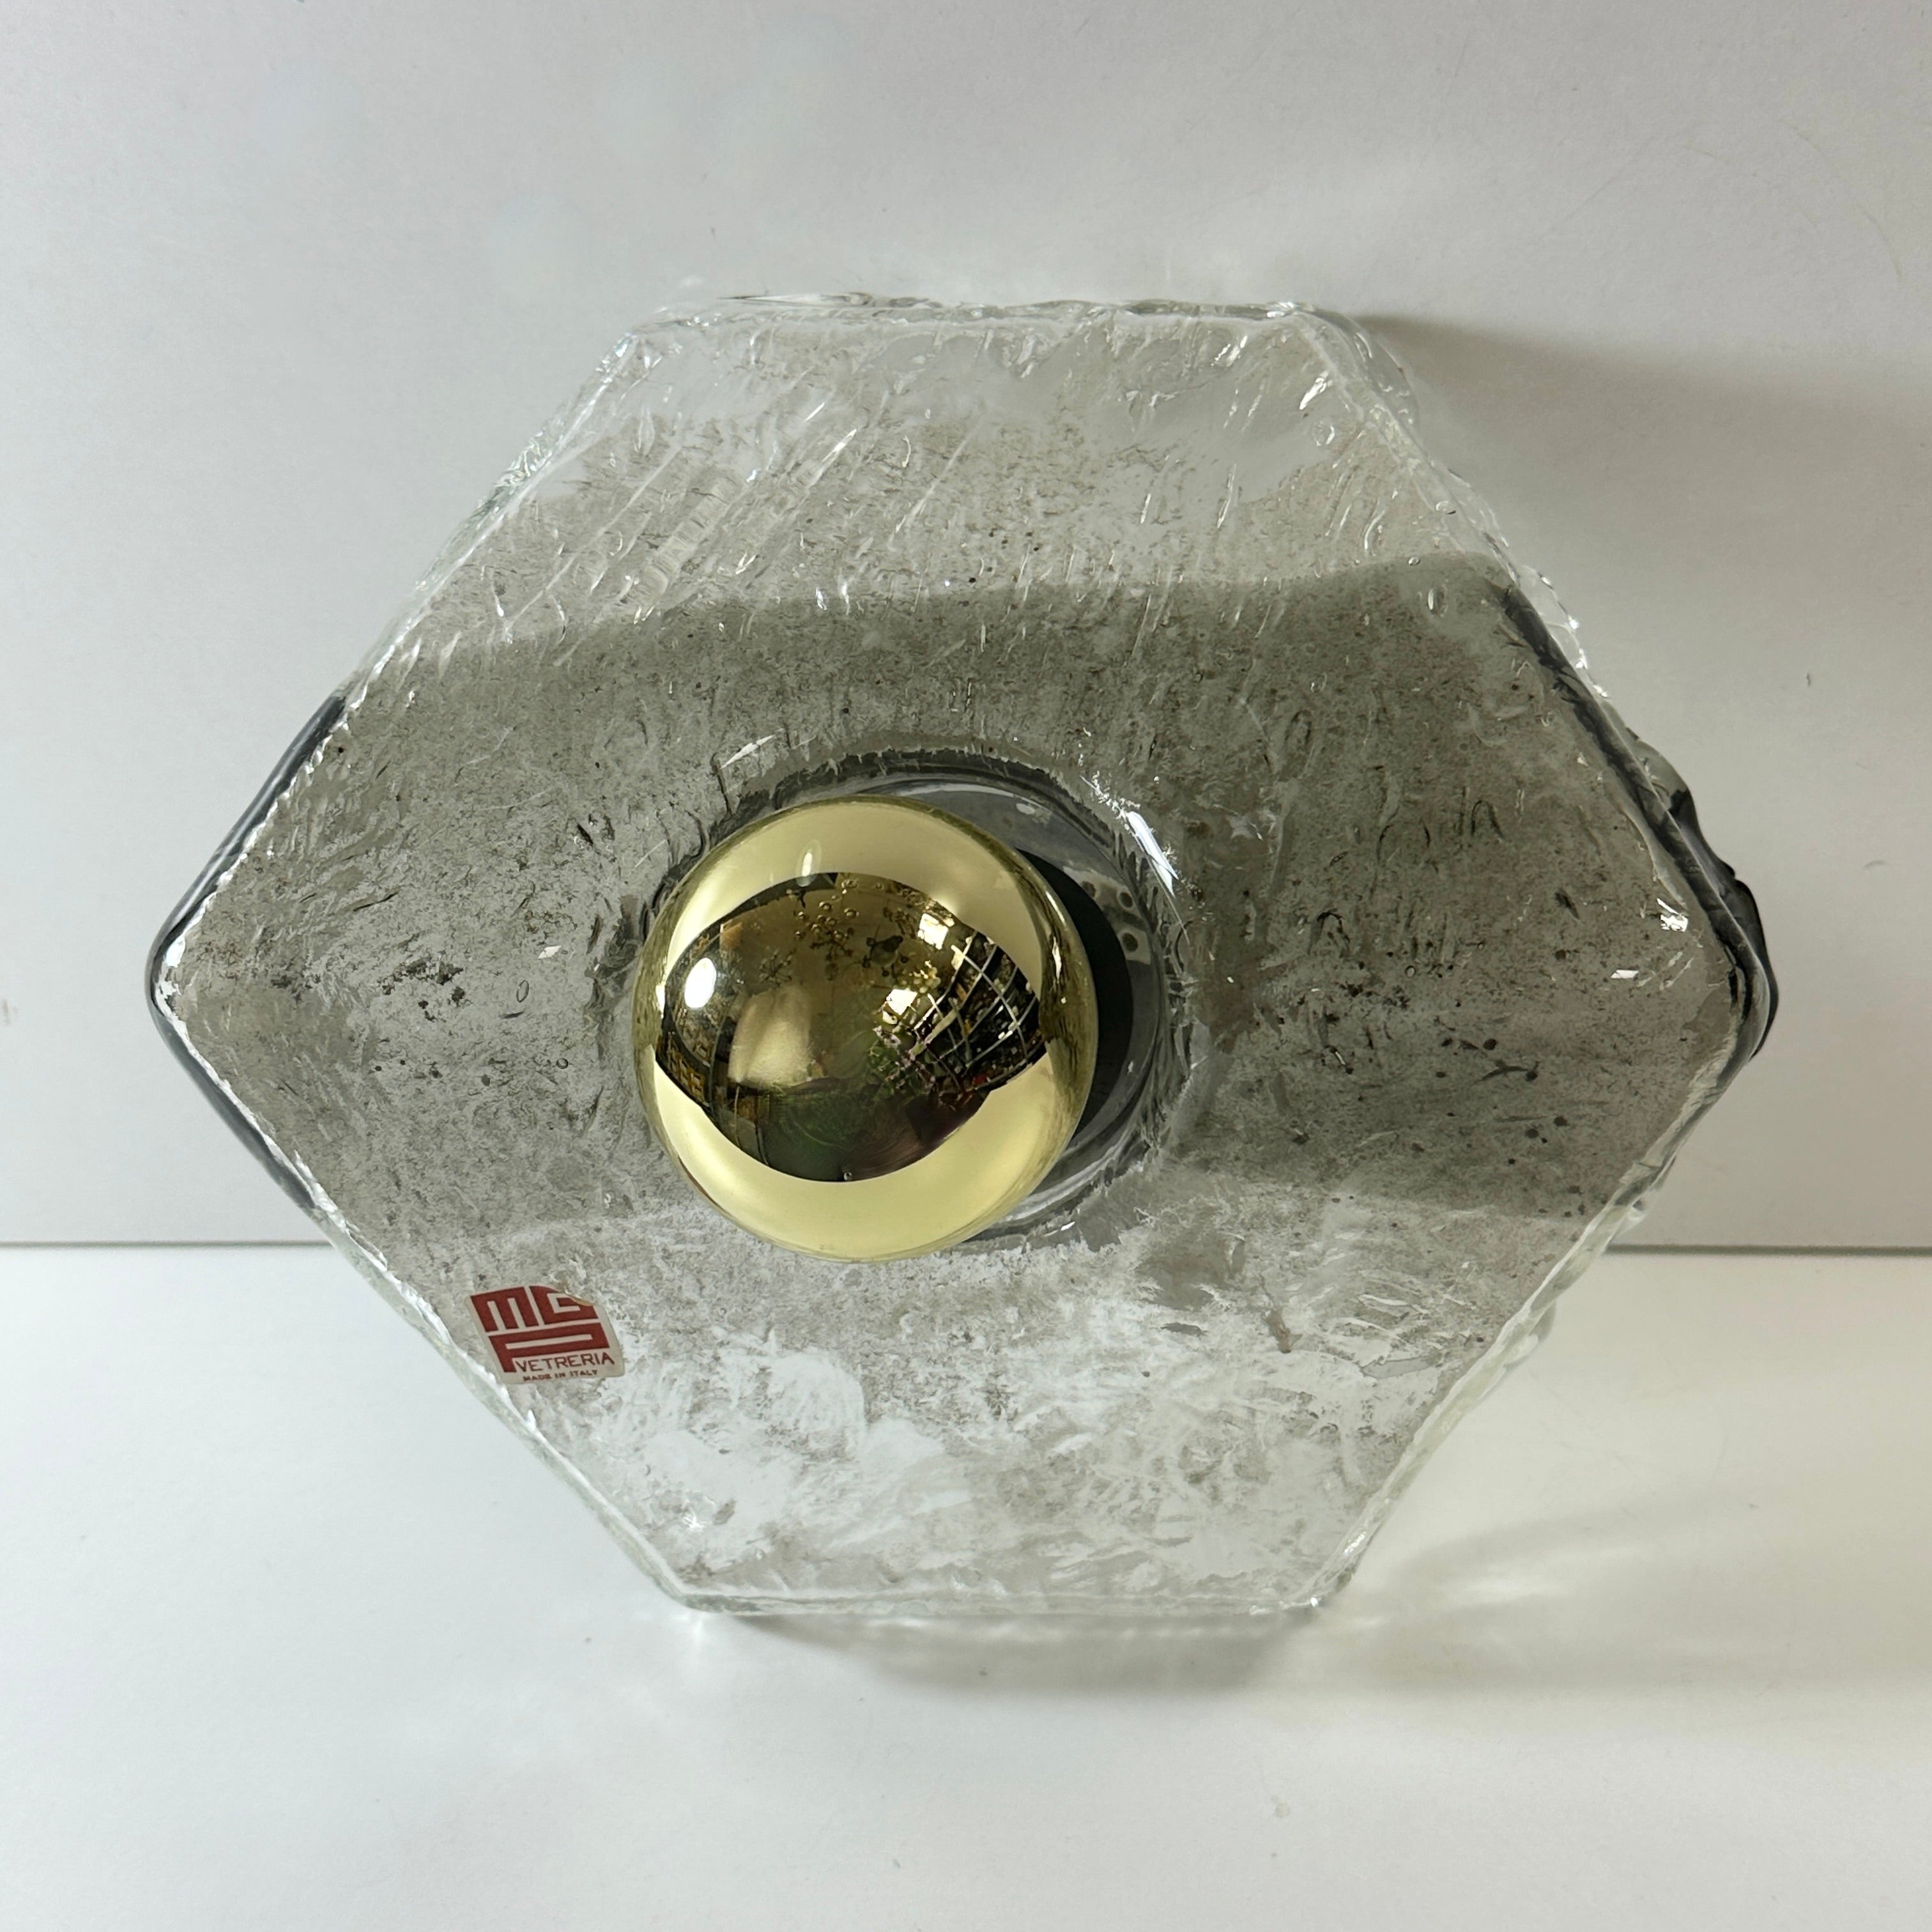 A beautiful ice glass flush mount, designed in the style of Mazzega Light, by MGP Vetreria, Italy. Made in Murano Italy in the 1970s. Gorgeous textured glass wall light with metal fixture. The Fixture requires one European E27 / 110 Volt Edison